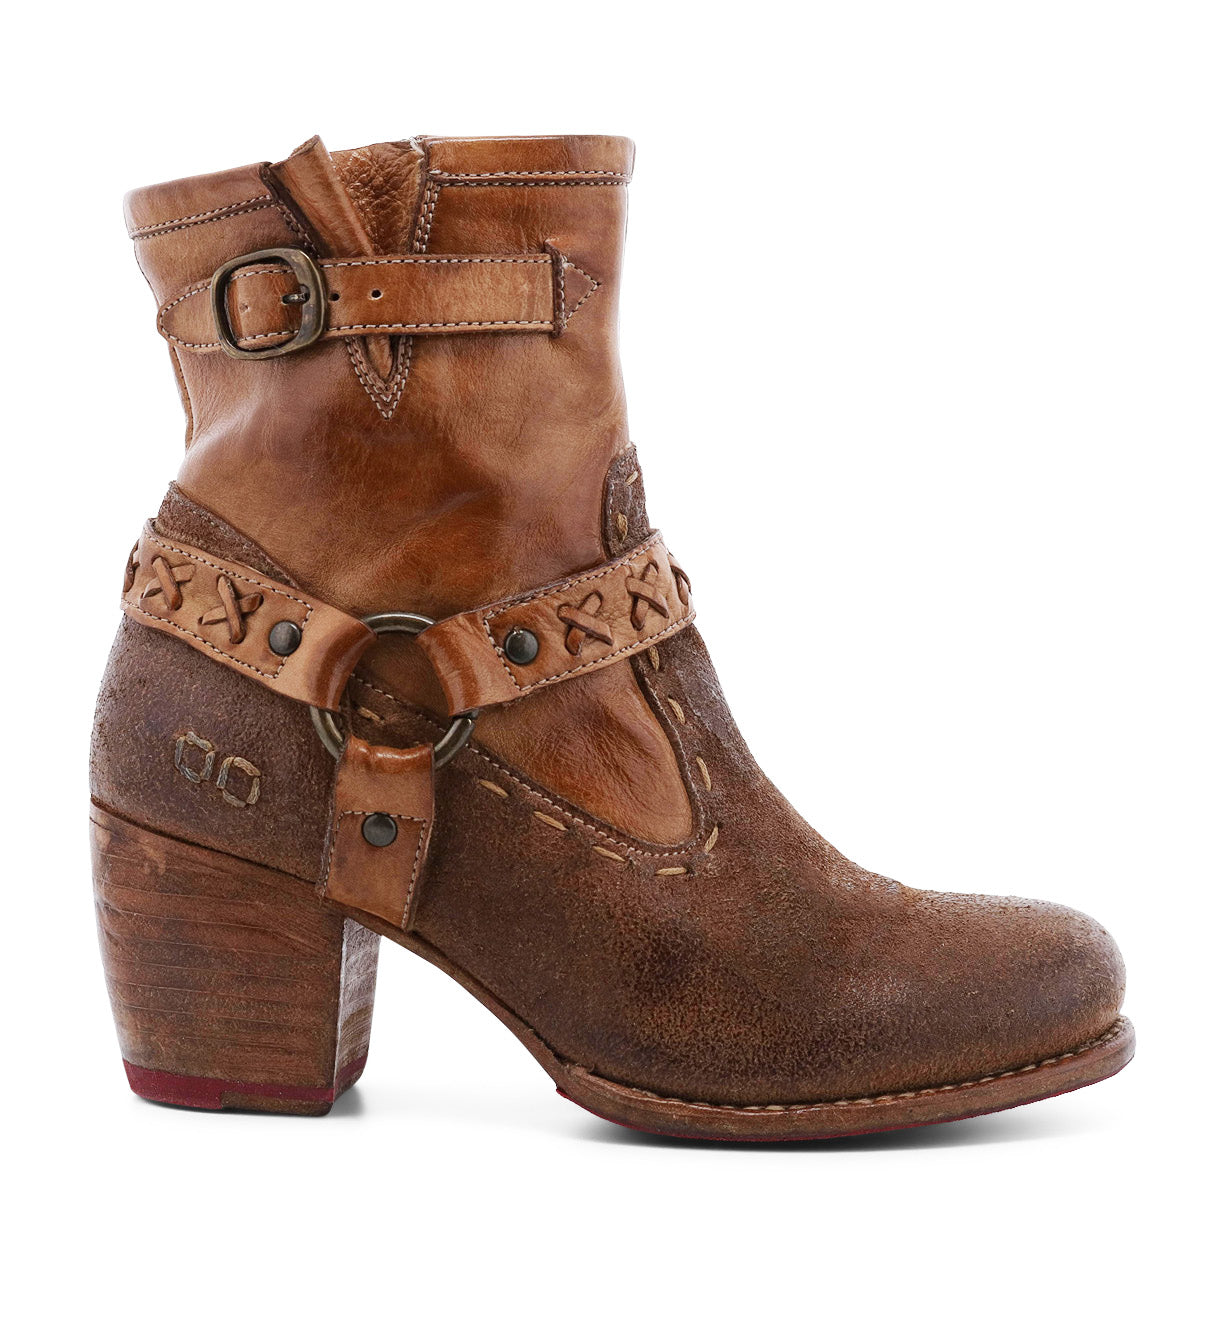 A women's Bedford II ankle boot with buckles and a wooden heel.